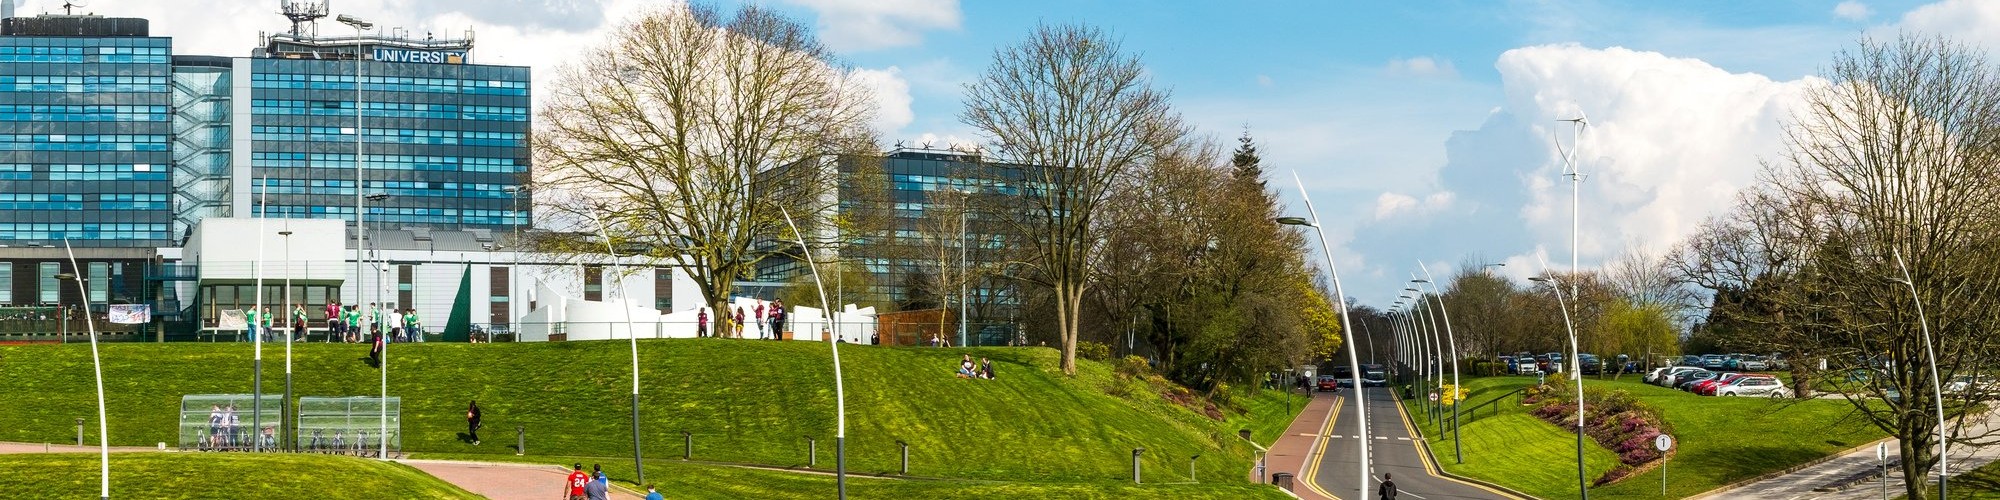 University of Derby cover image